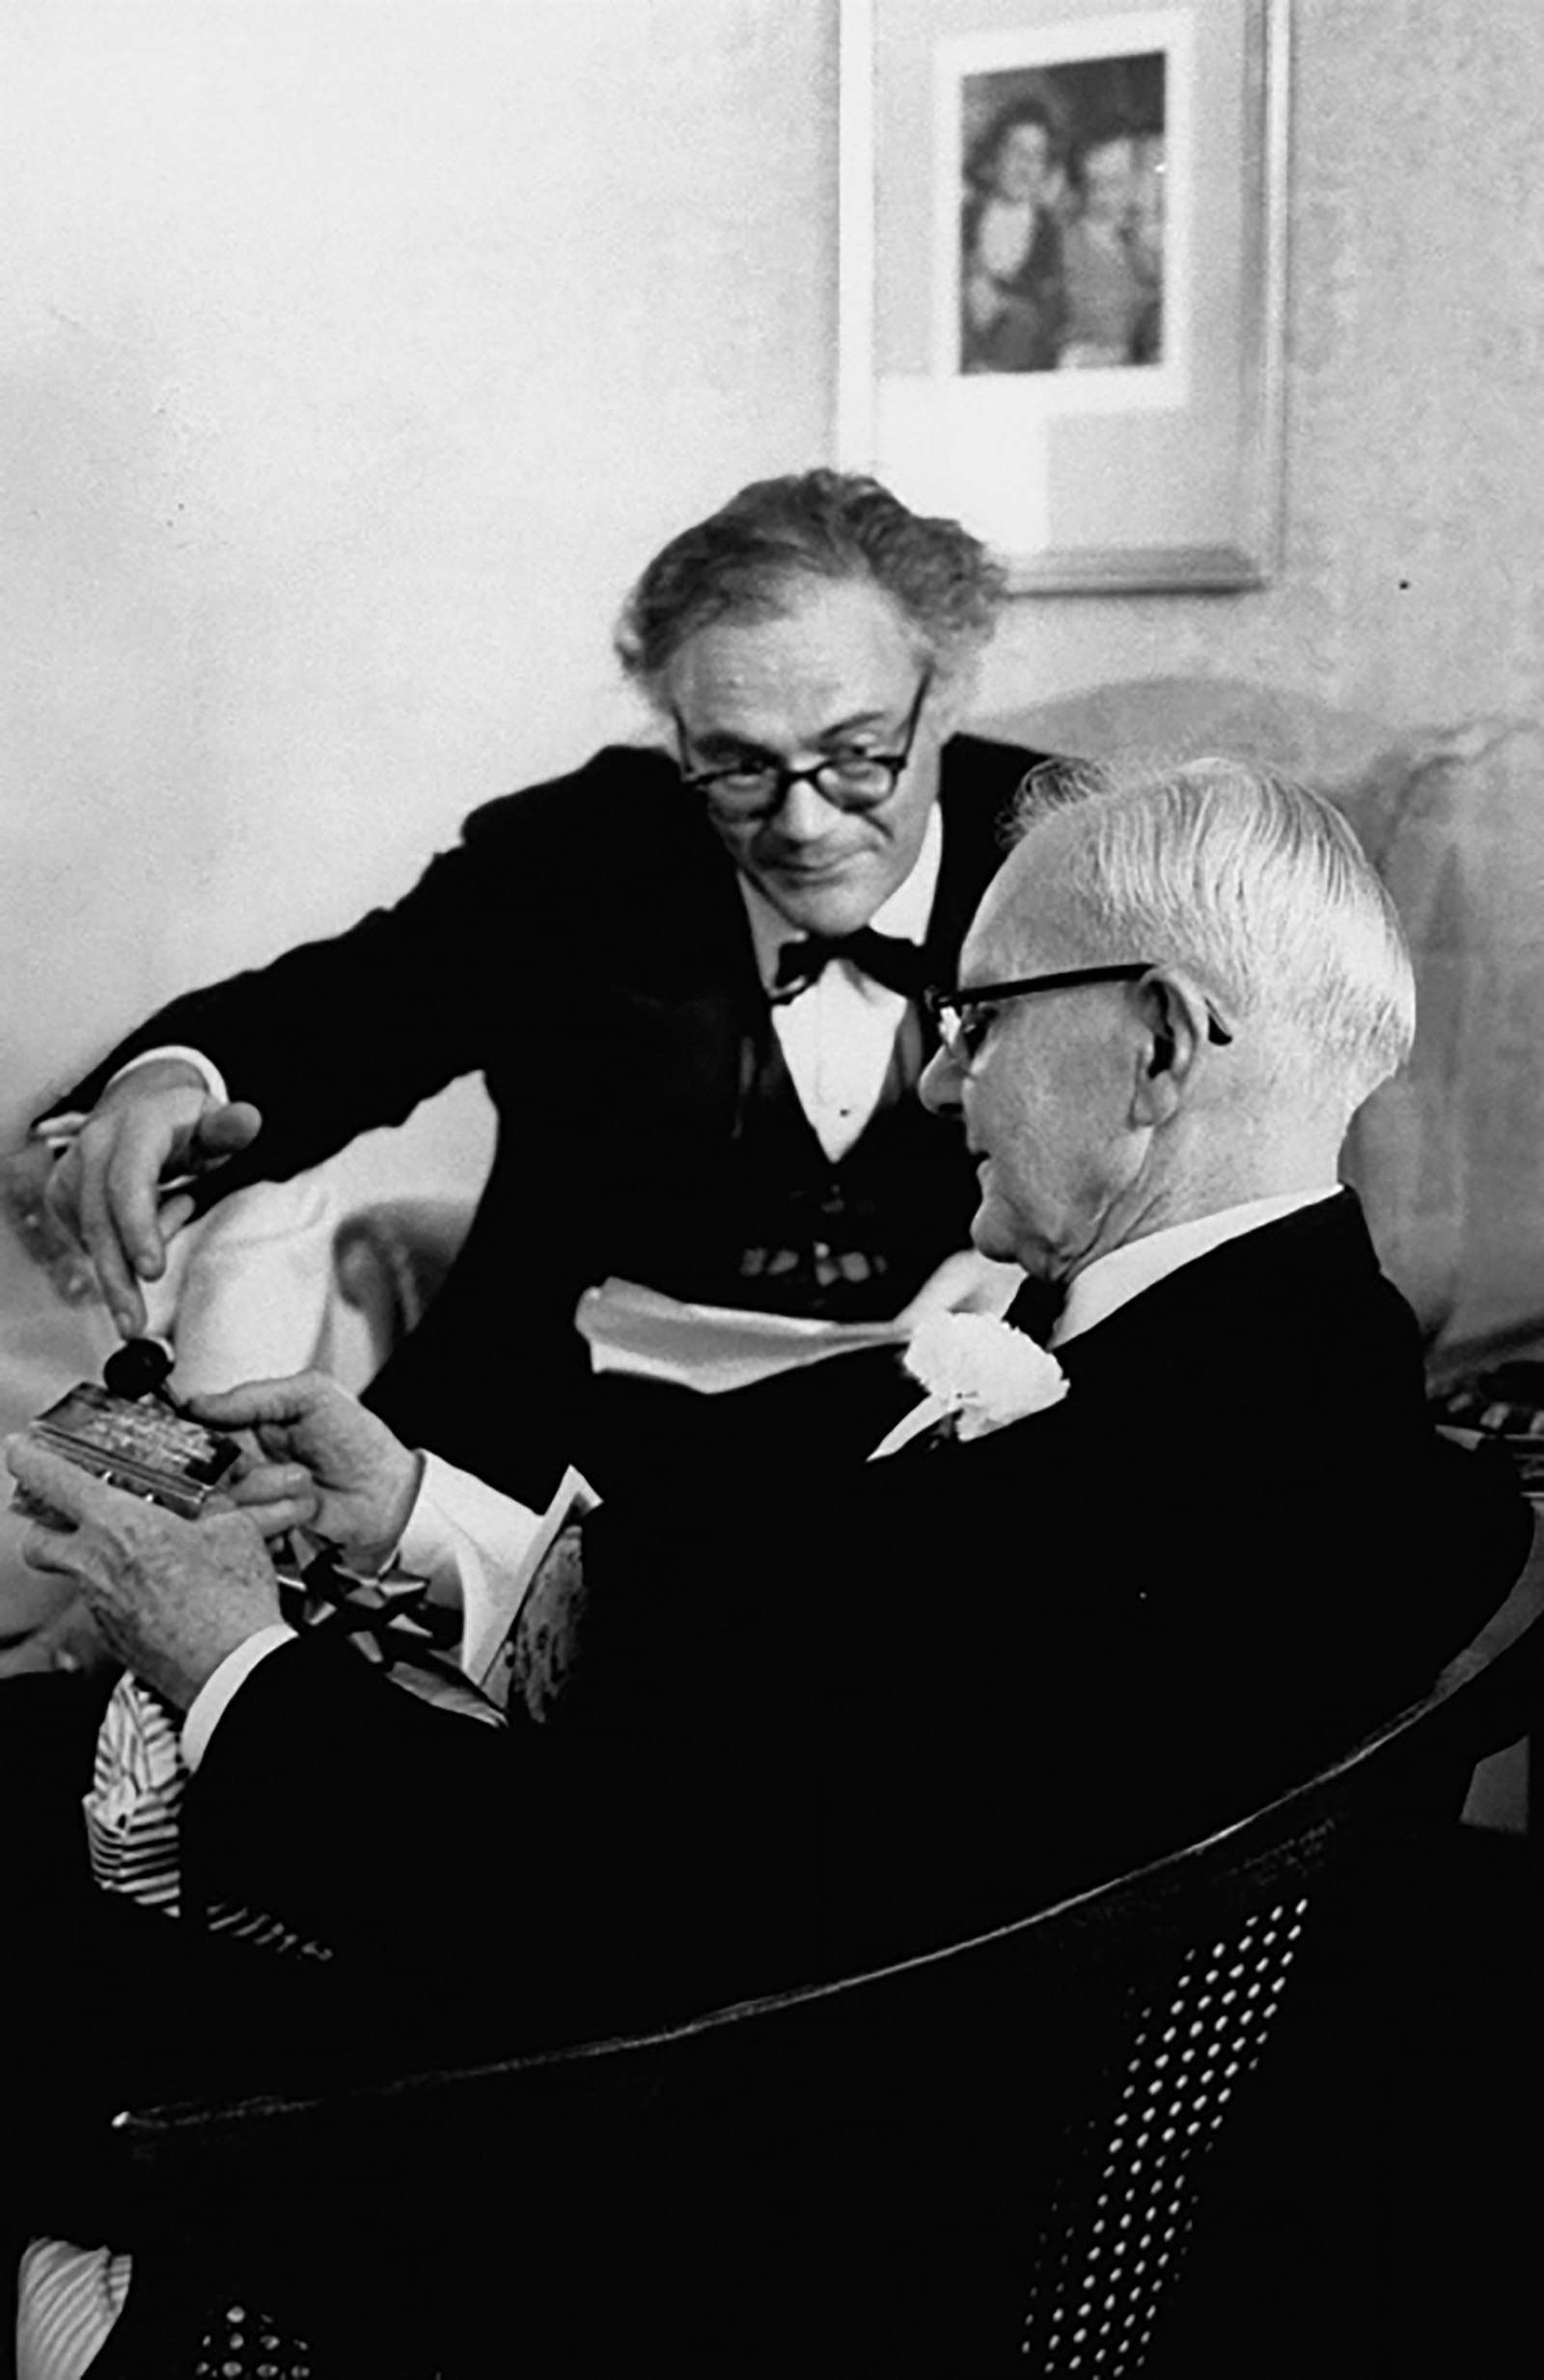 Robert Lowell giving John Crowe Ransom a gift for his eightieth birthday, 1968